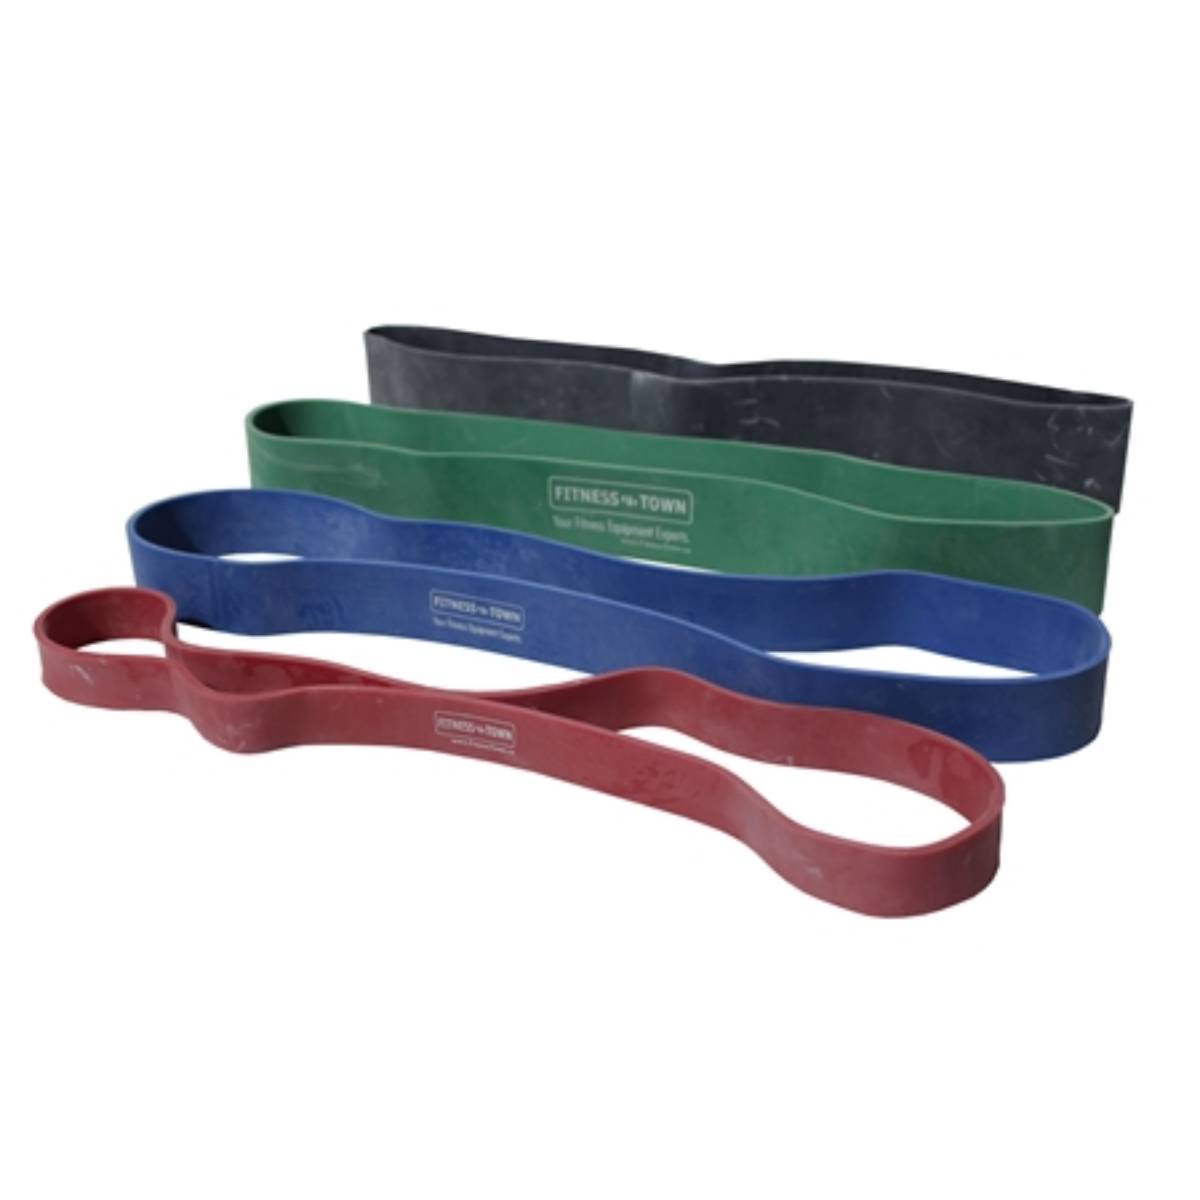 Ripcords Resistance Exercise Bands - Fitness Town